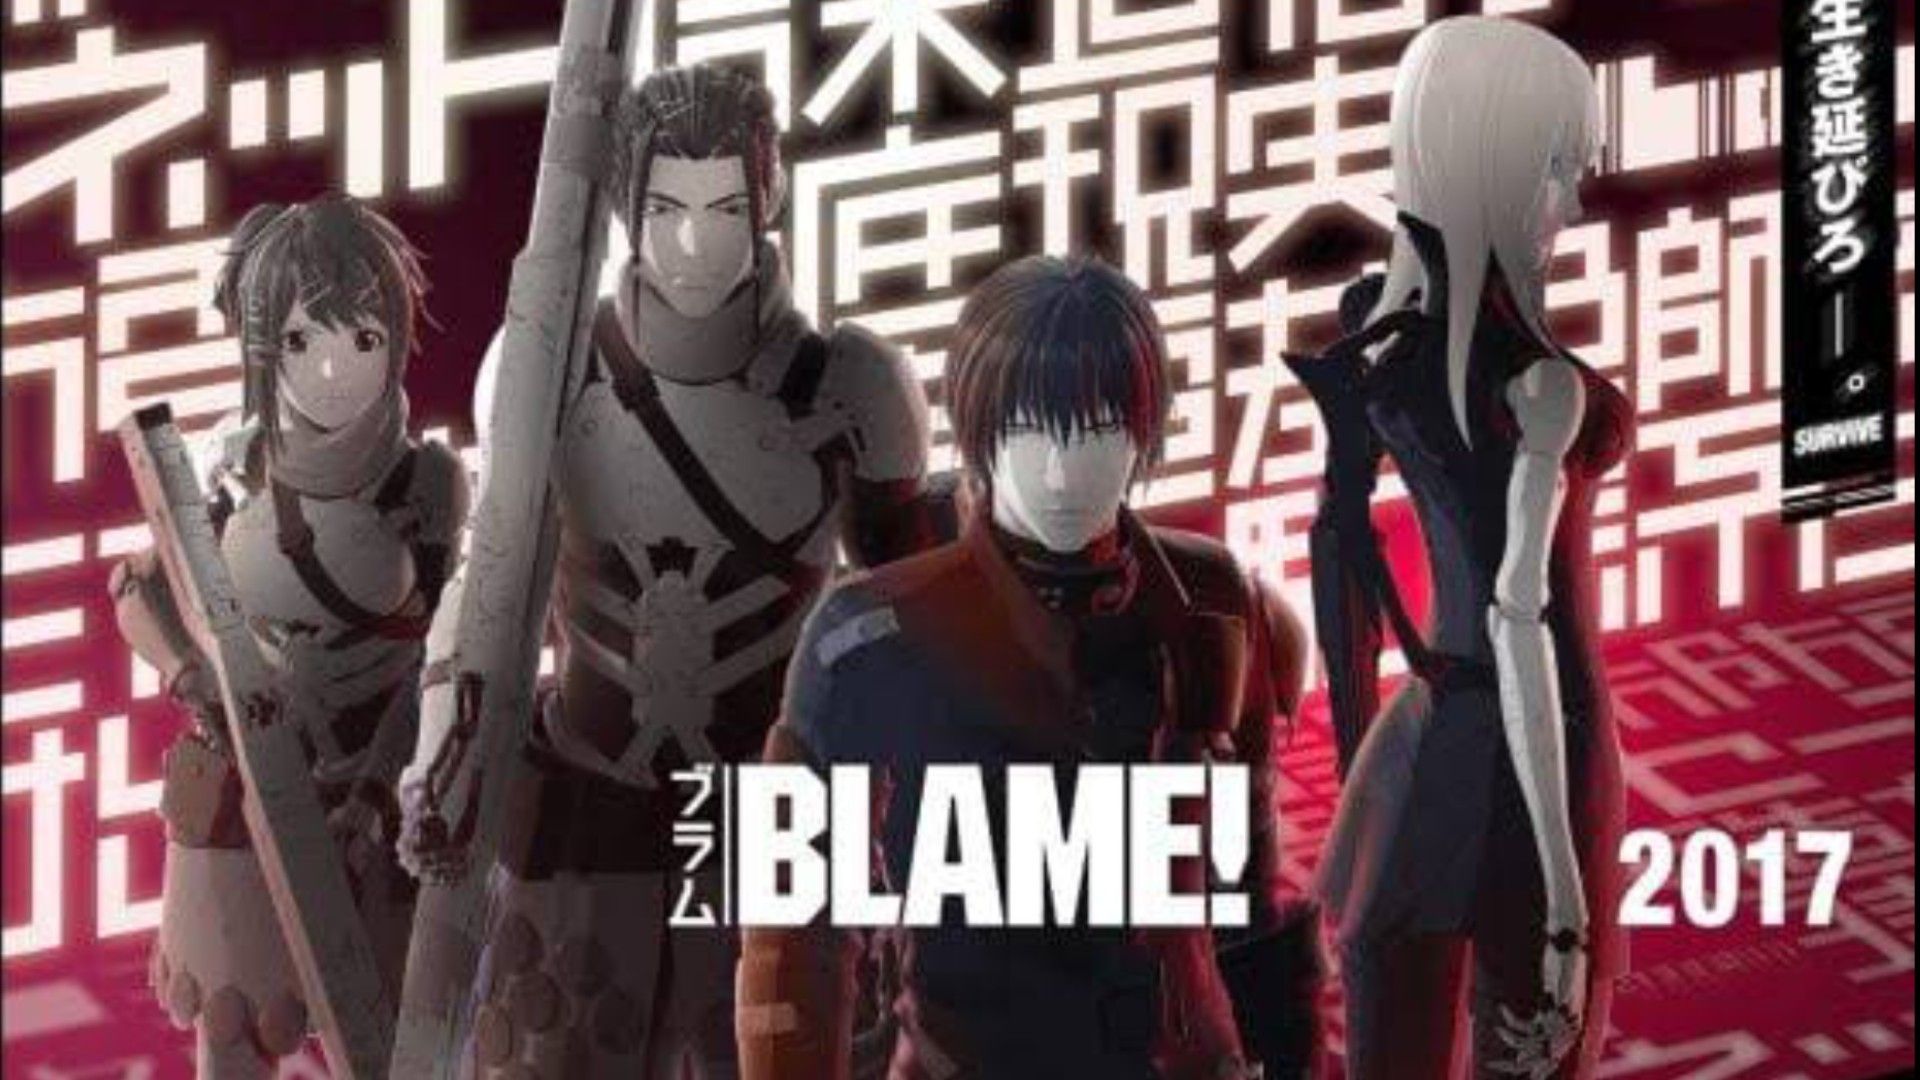 Netflix first teased its new anime Blame in a completely different  series  Polygon